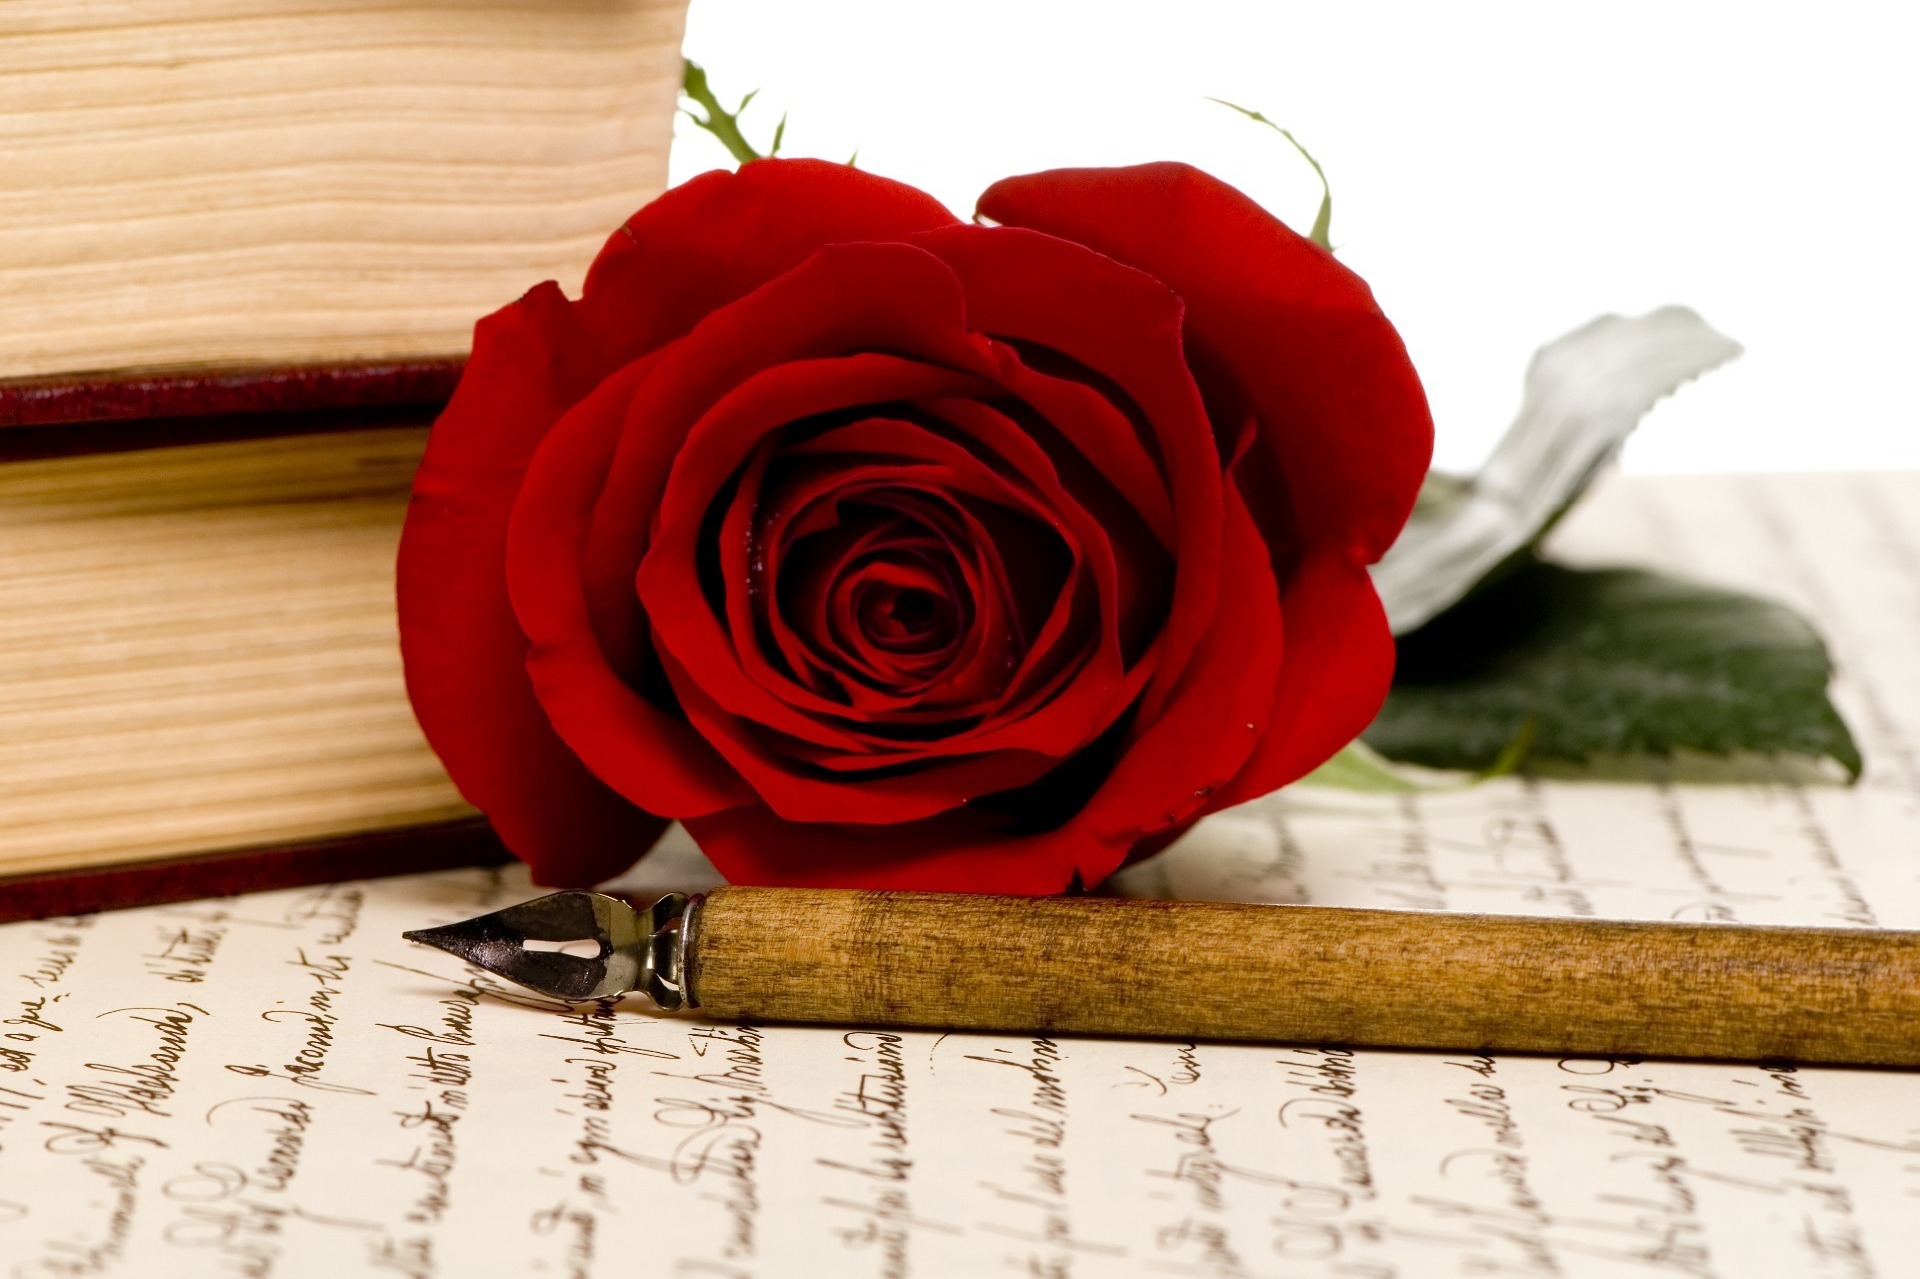 A will, with a red rose and pen resting on top.